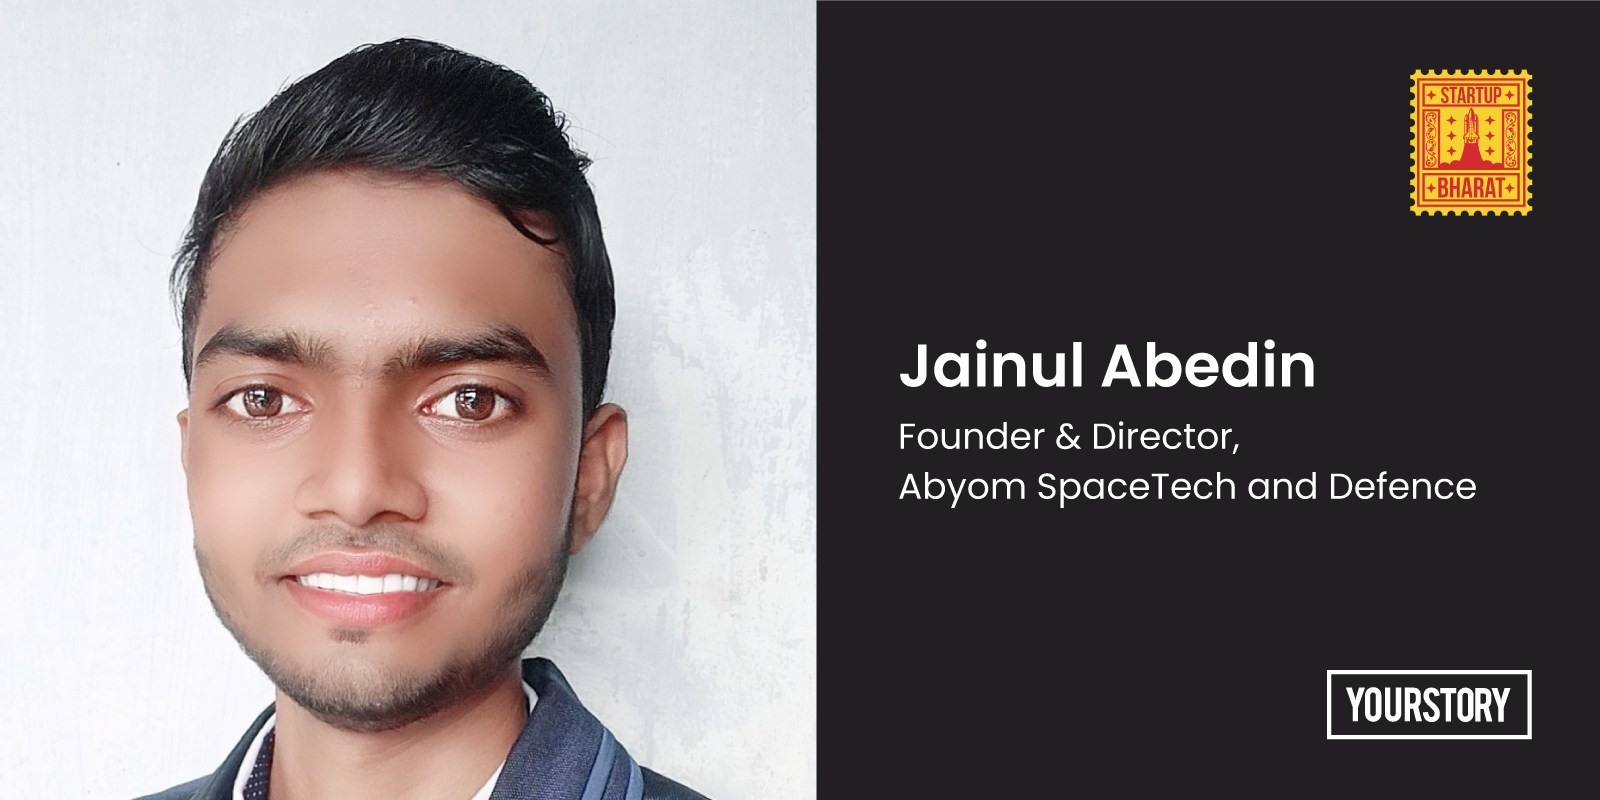 [Startup Bharat] Gorakhpur-based Abyom is building a reusable launch vehicle to solve space debris problems 
